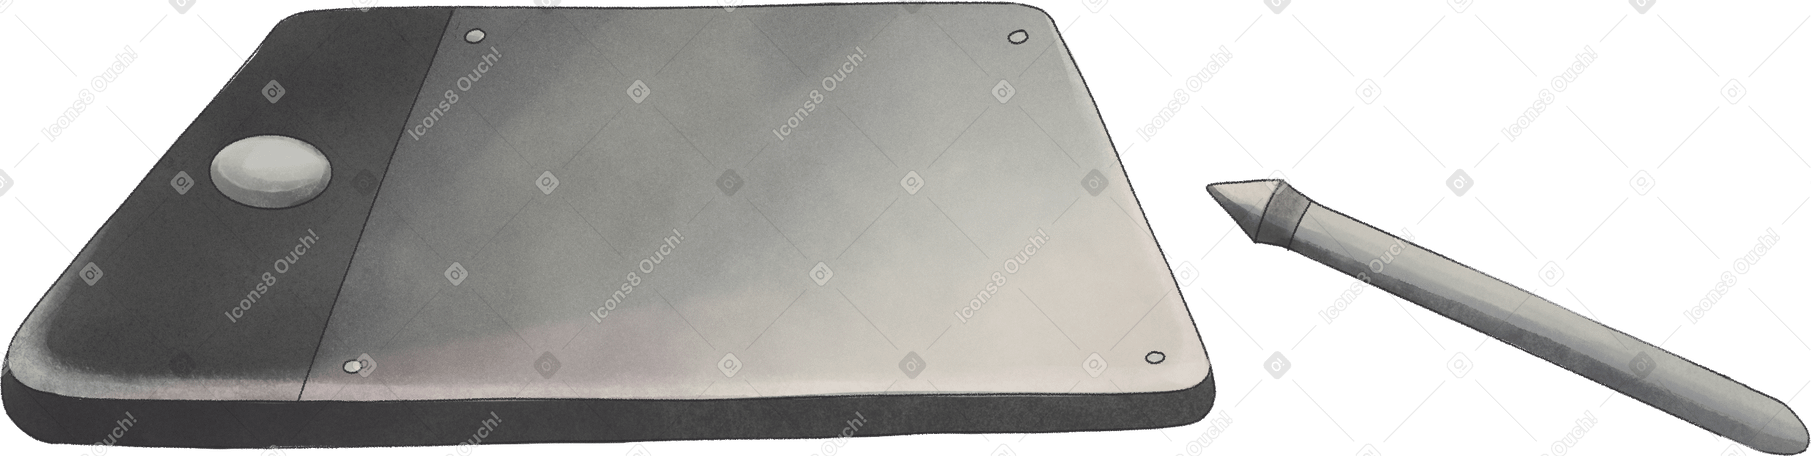 drawing tablet with stylus Illustration in PNG, SVG